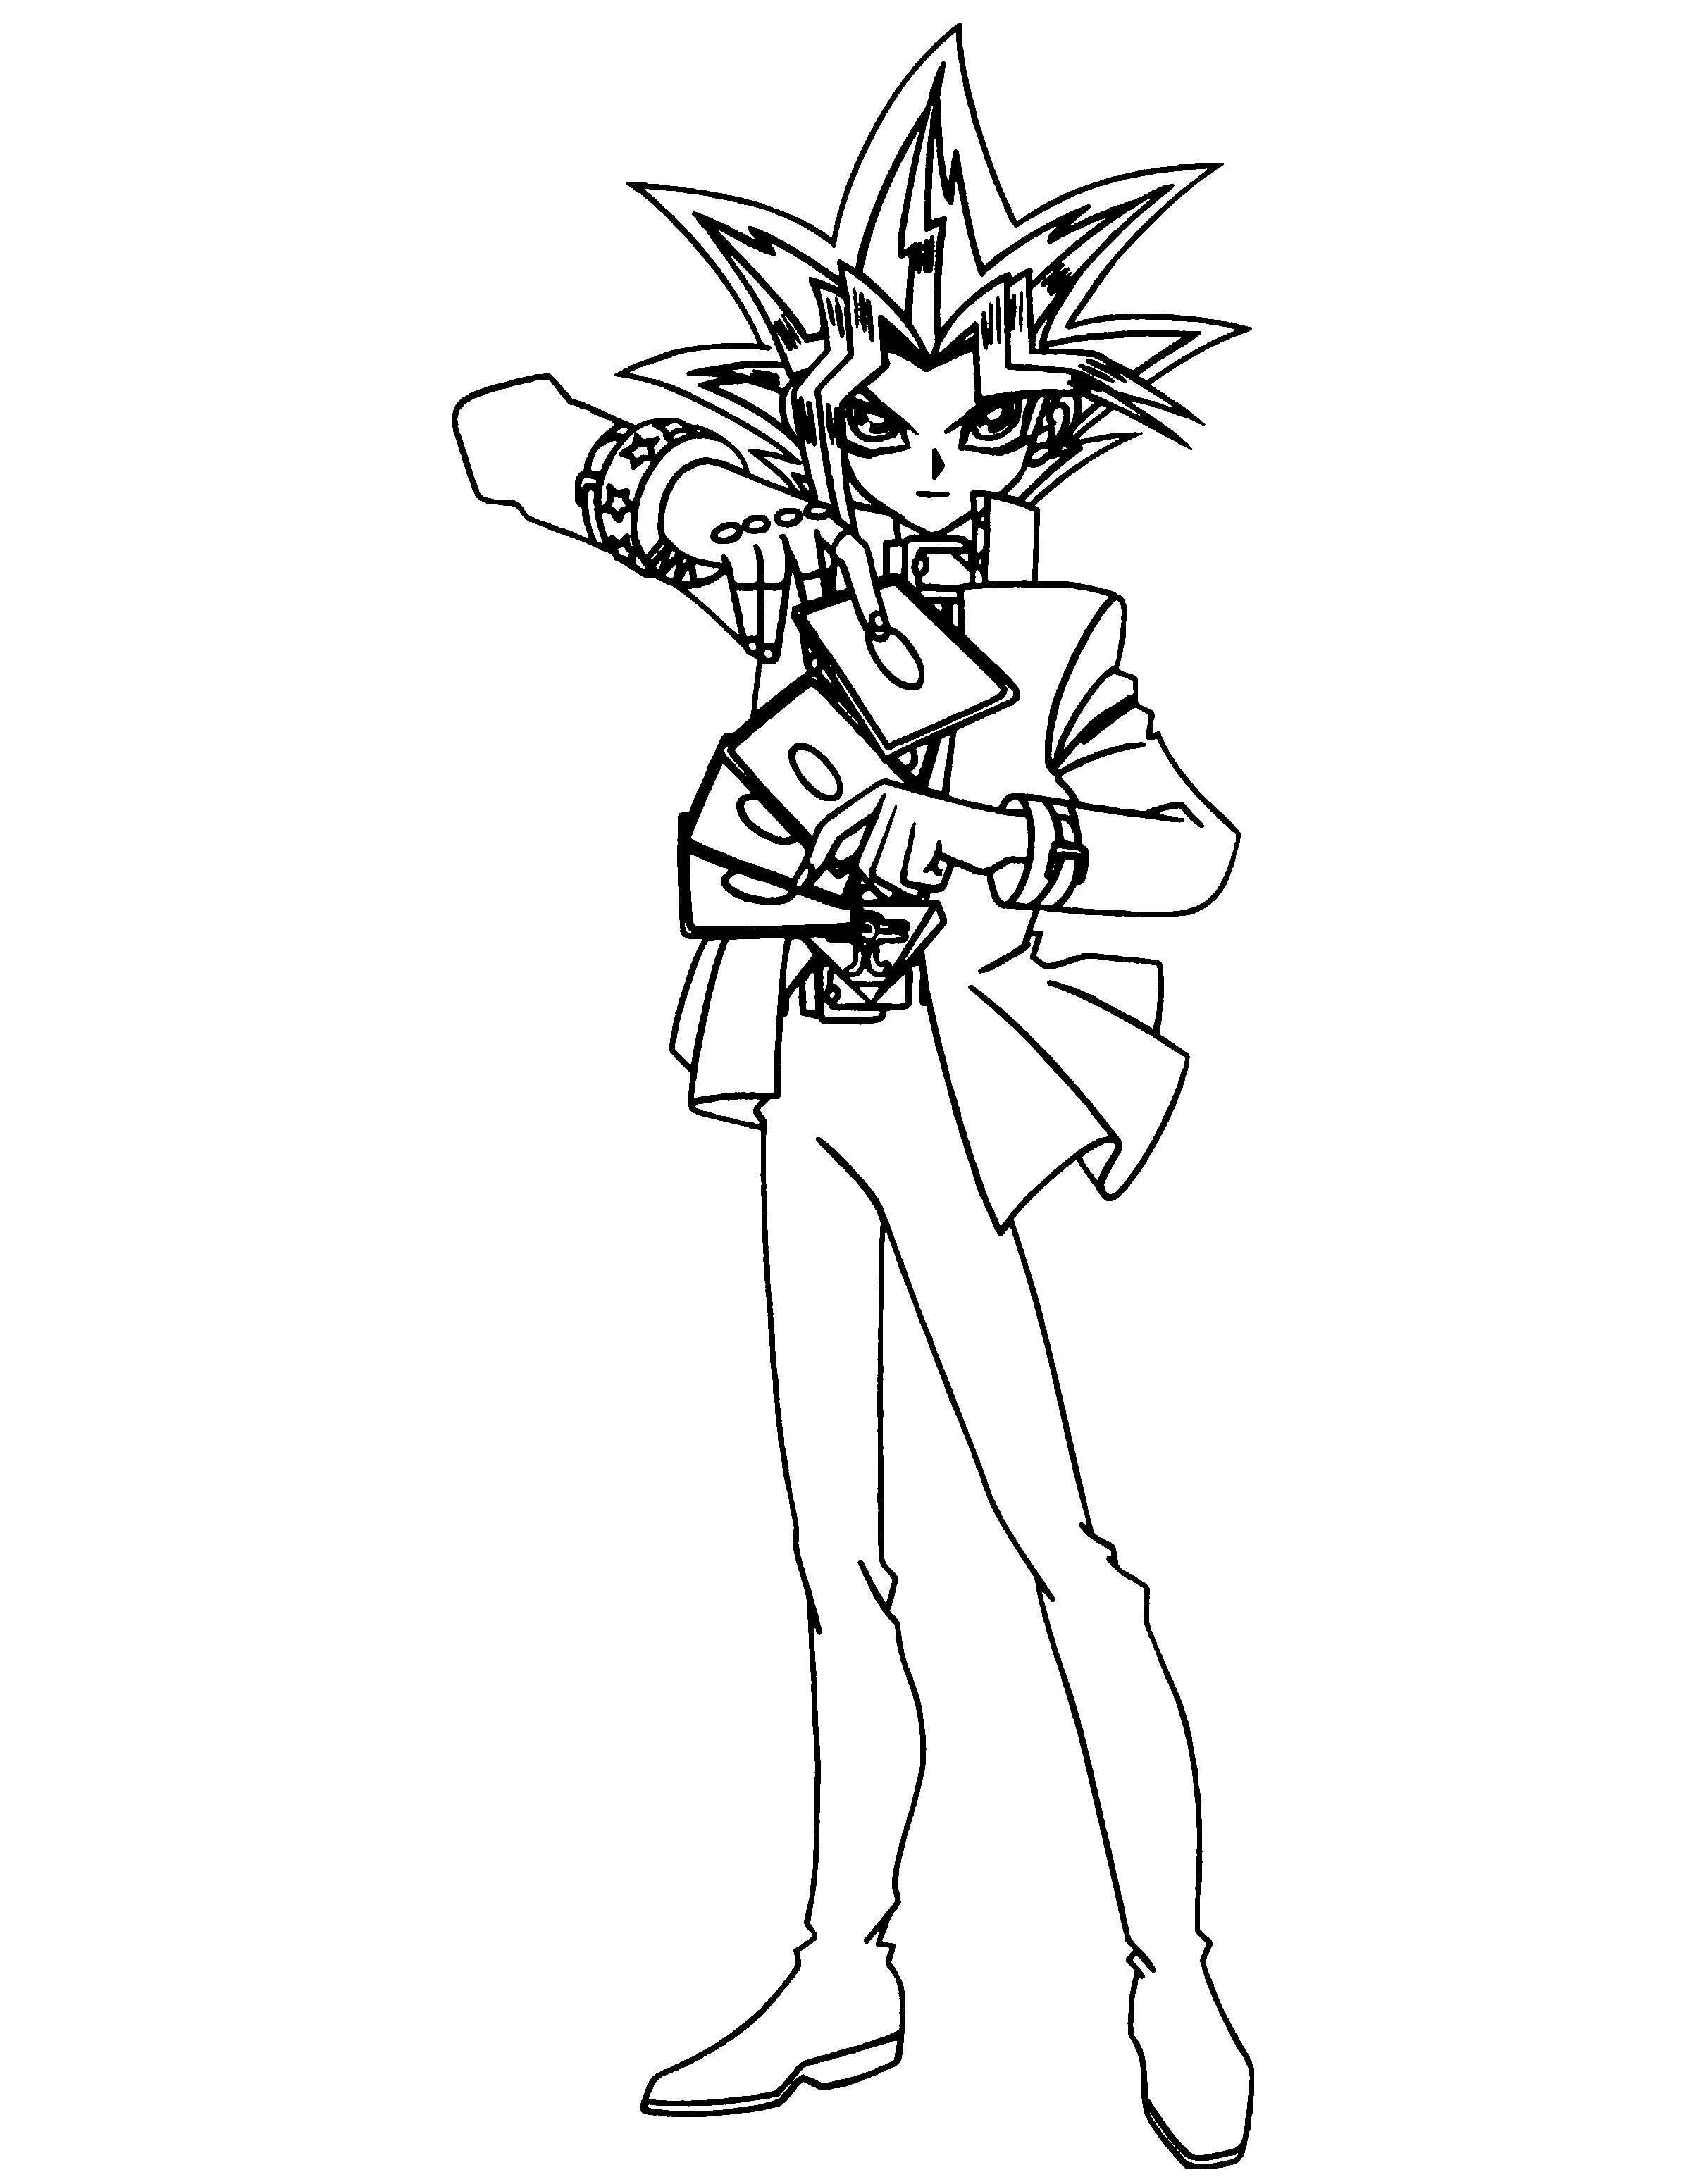 animated-coloring-pages-yu-gi-oh-image-0078